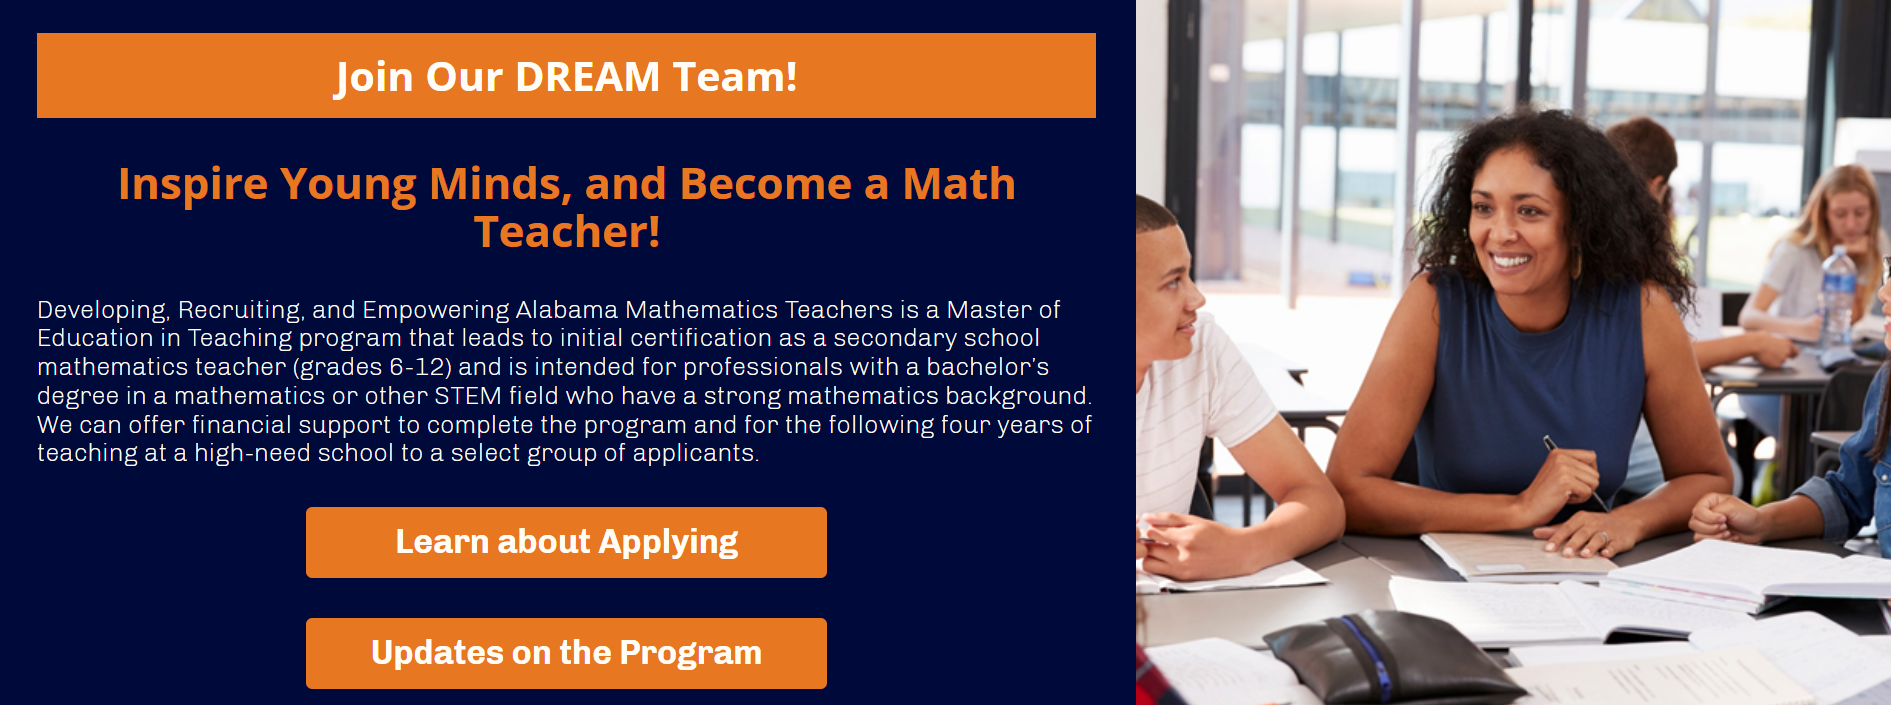 Early application period for DREAM-Math project now open